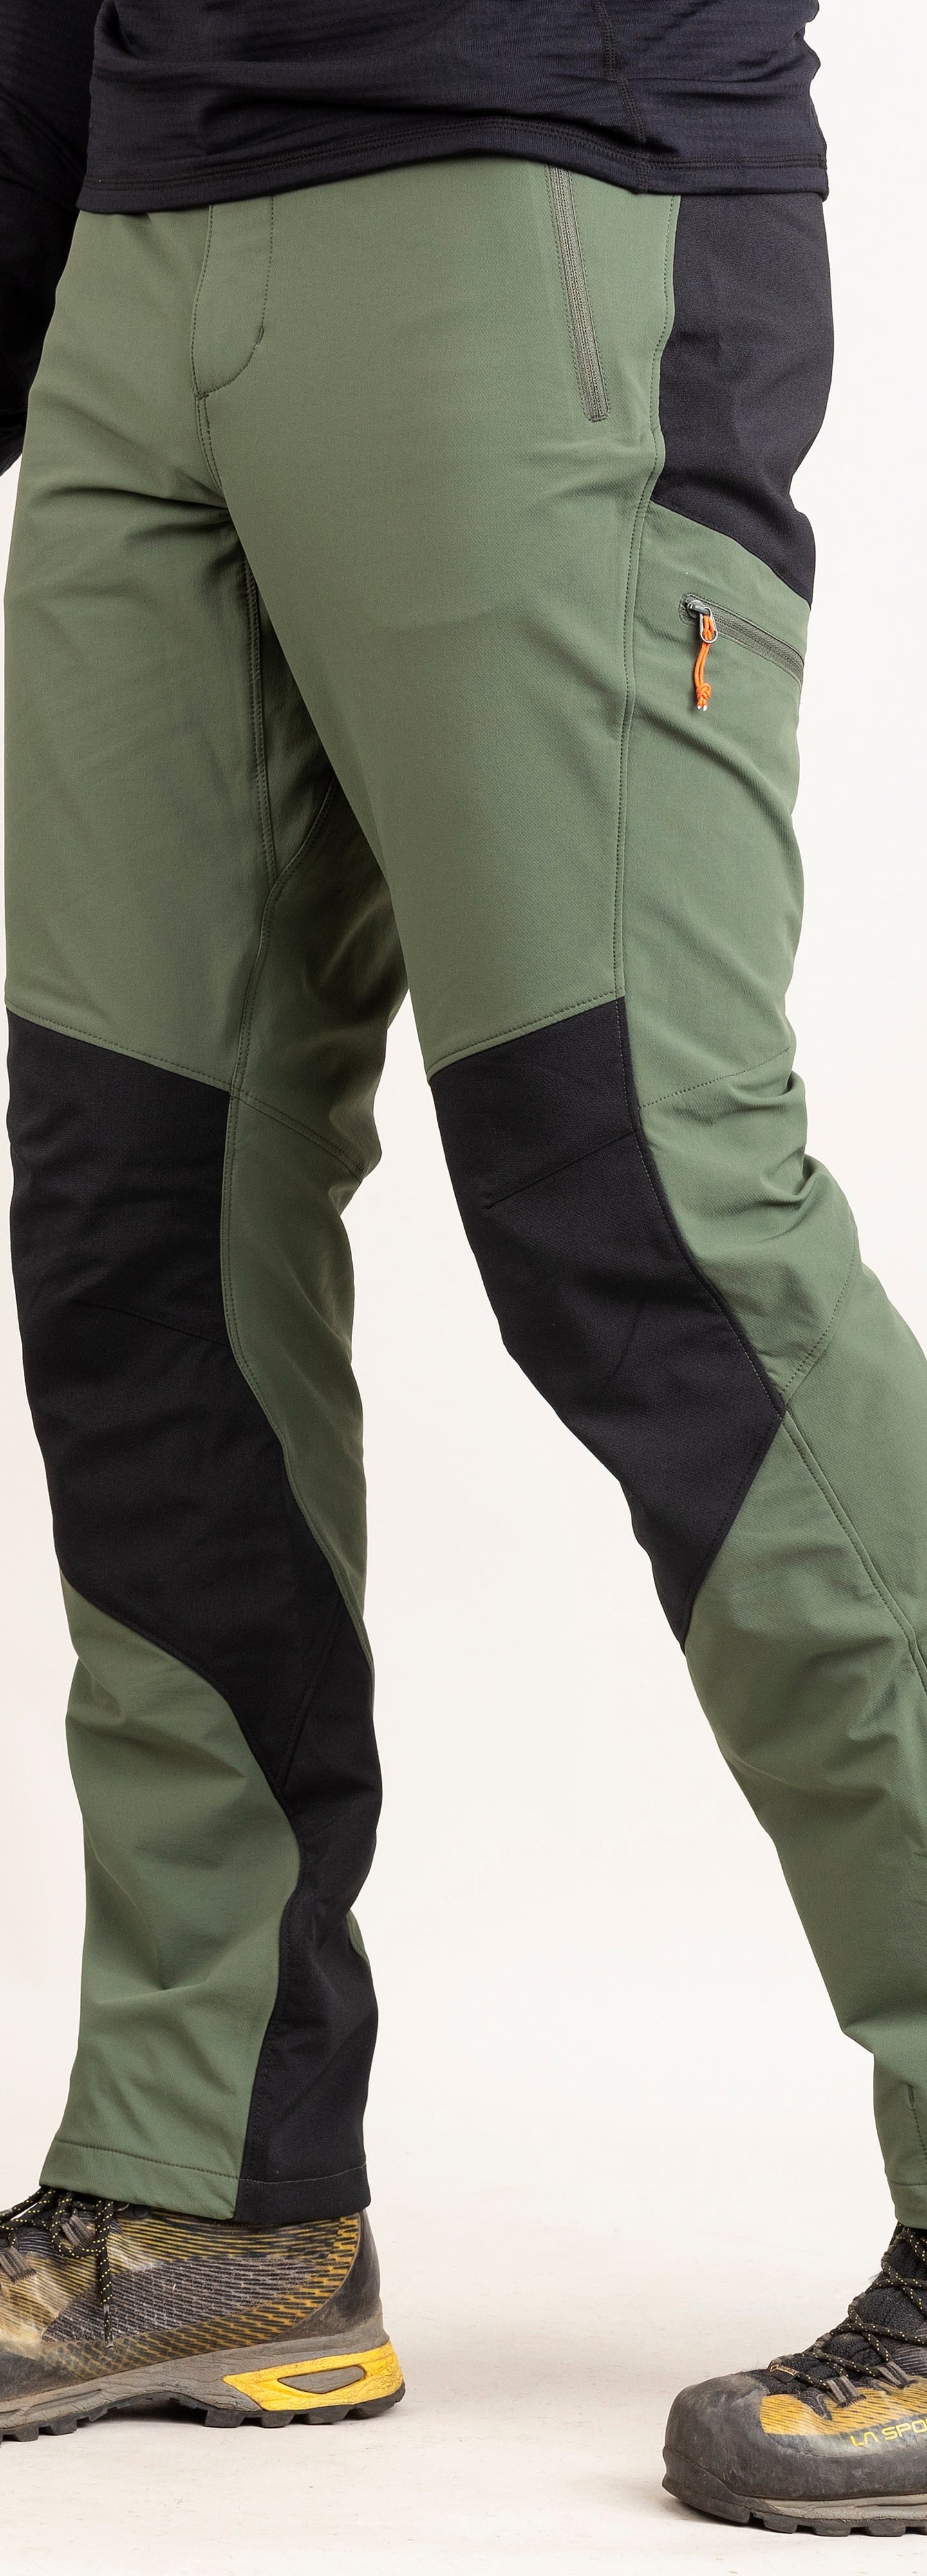 Morän Softshell Standard Pant Men, Olive Green, Hiking, Softshell  trousers, Activities, Trousers, Shorts, Hiking, Activities, Trousers, Shorts, Men, Hiking trousers, Trousers